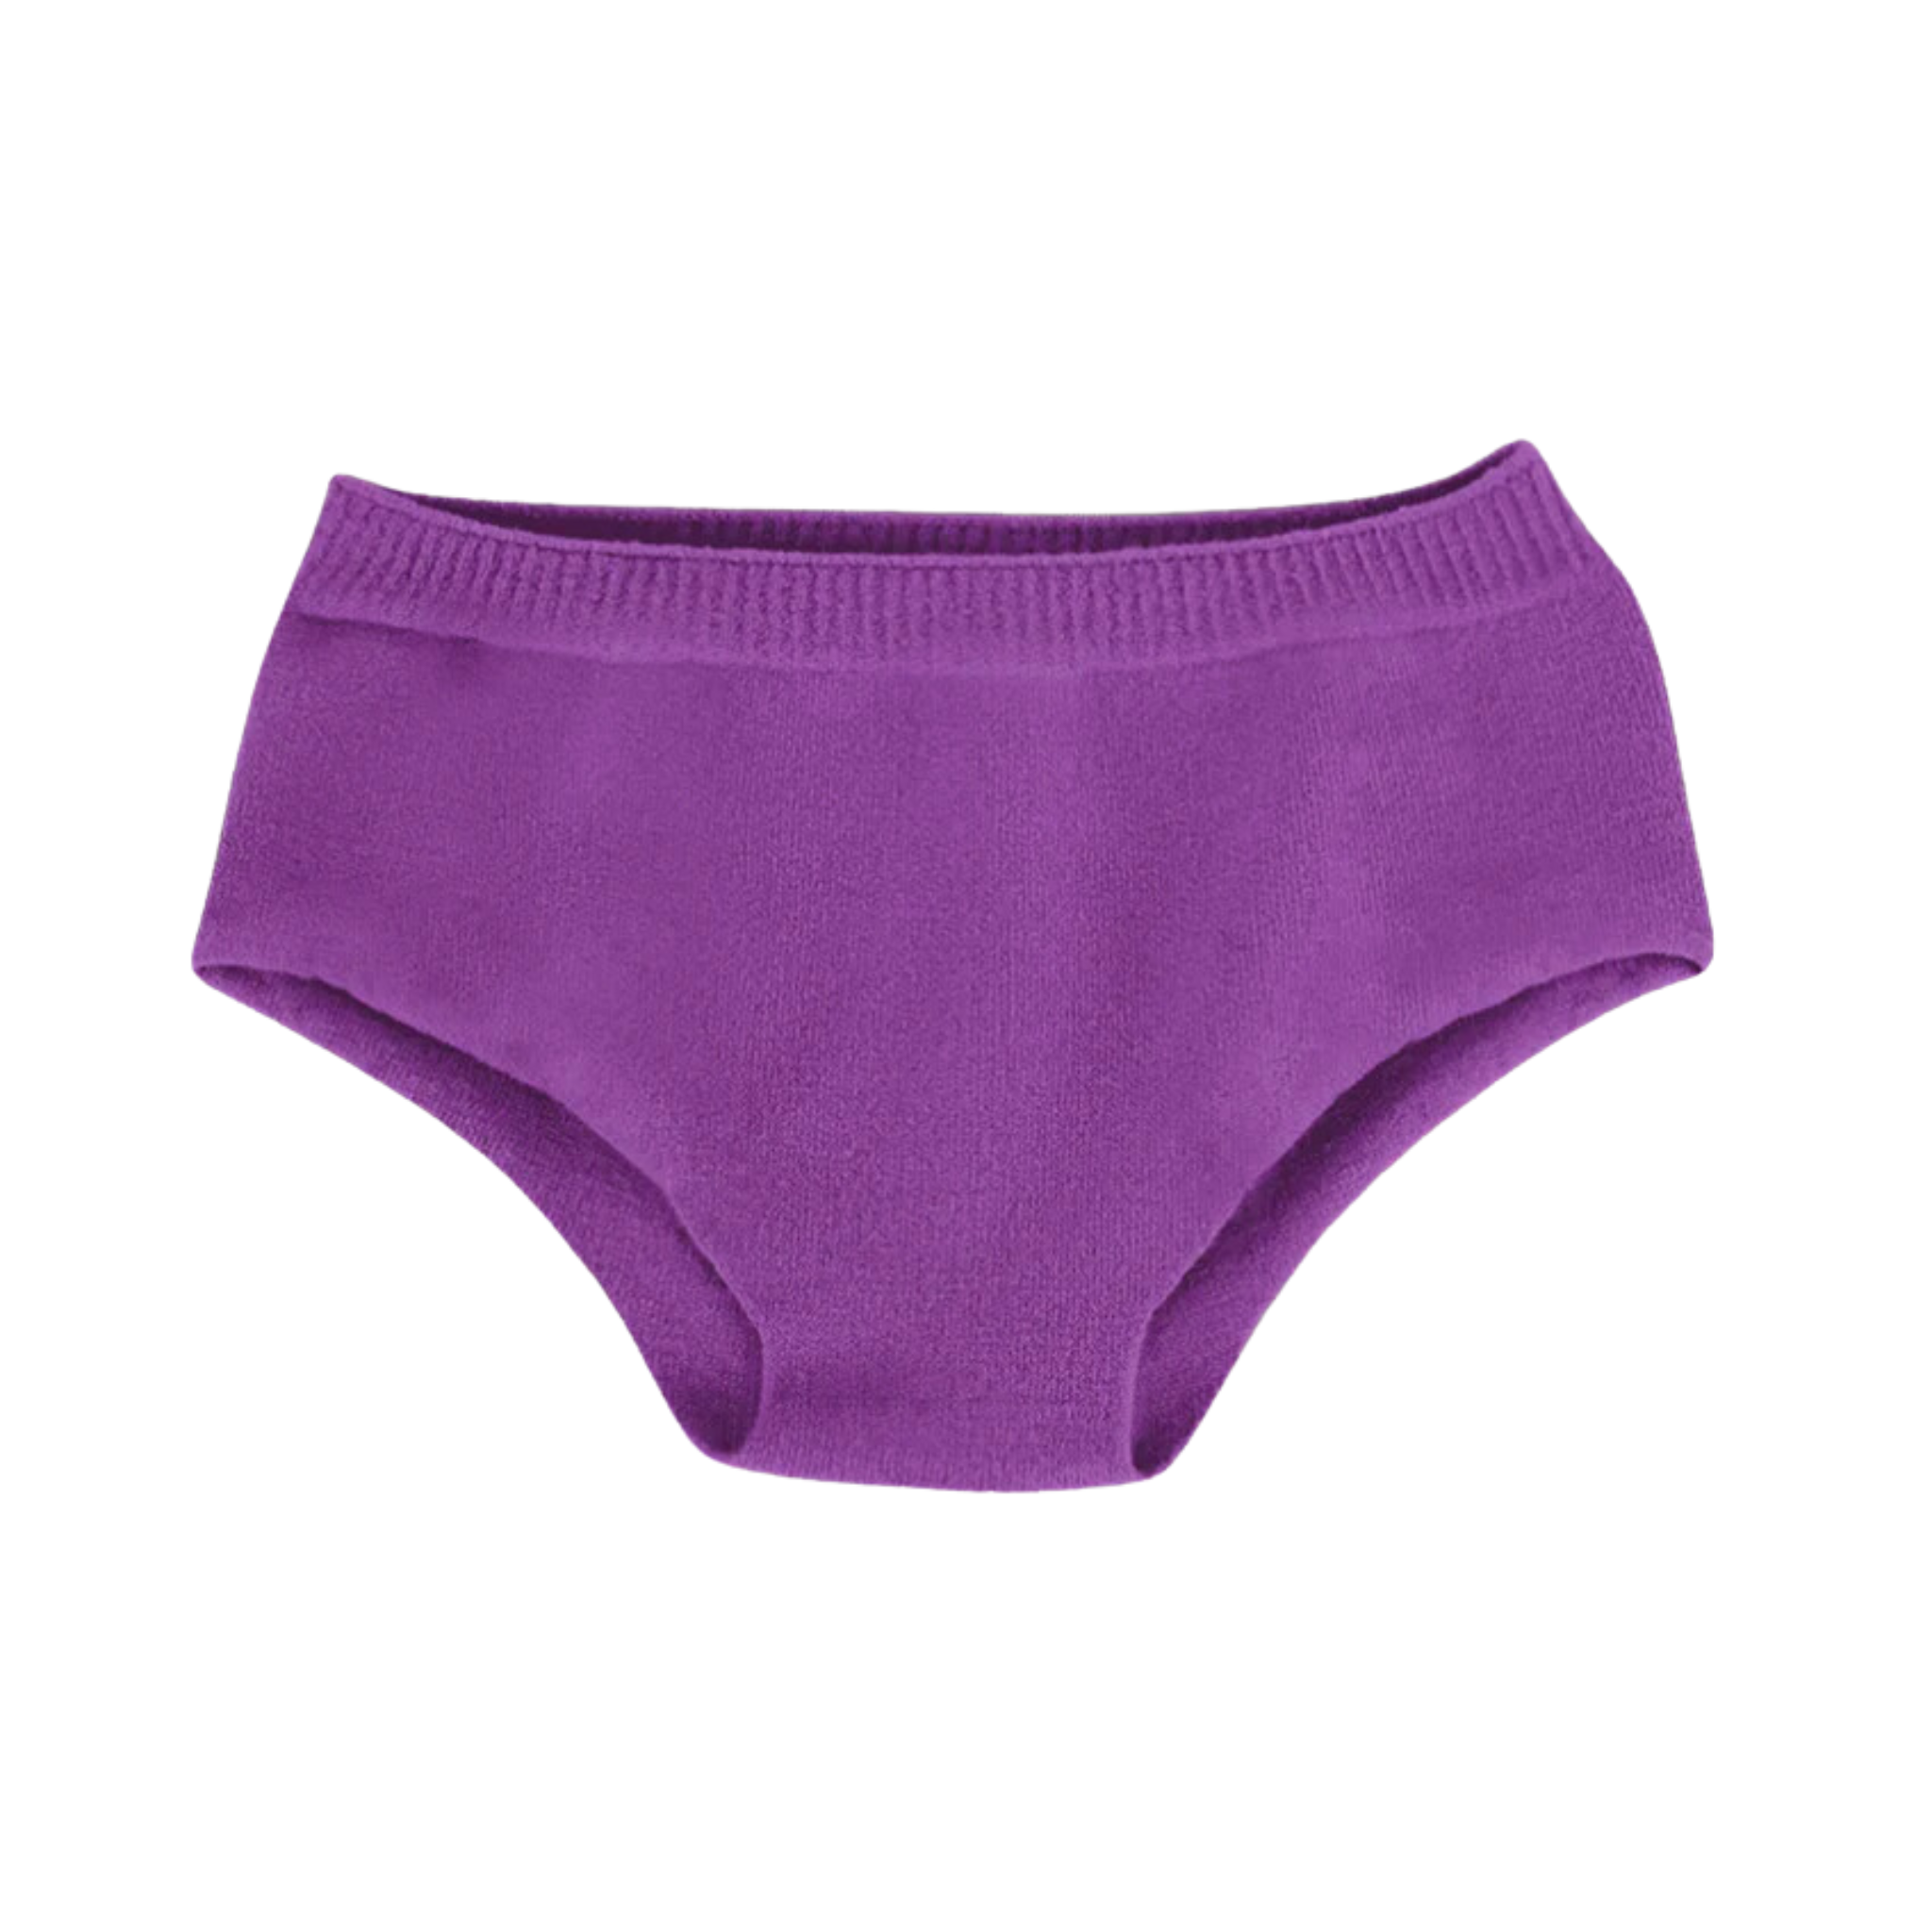 Kids' - Fitted Fit Pants or Underwear in White or Pink or Black